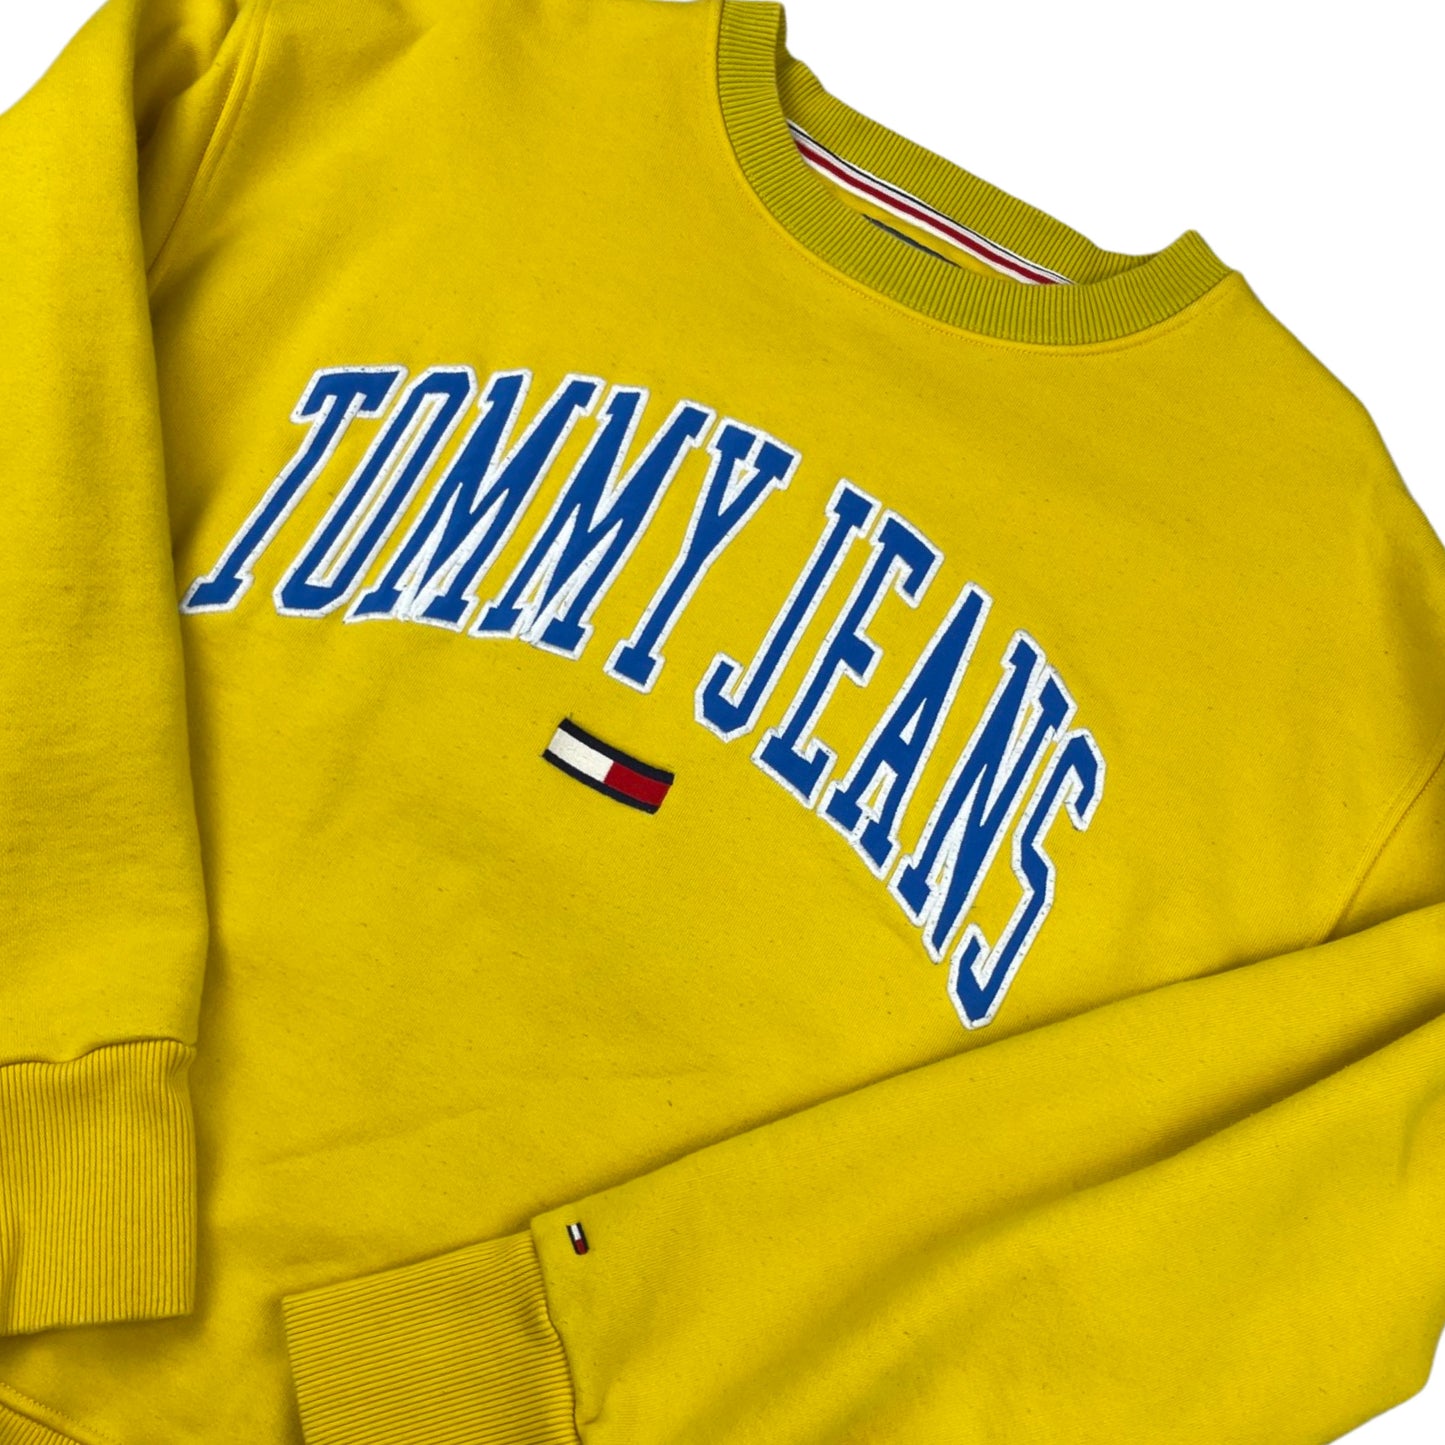 Vintage Tommy Jeans Yellow Spell-out Sweatshirt XL